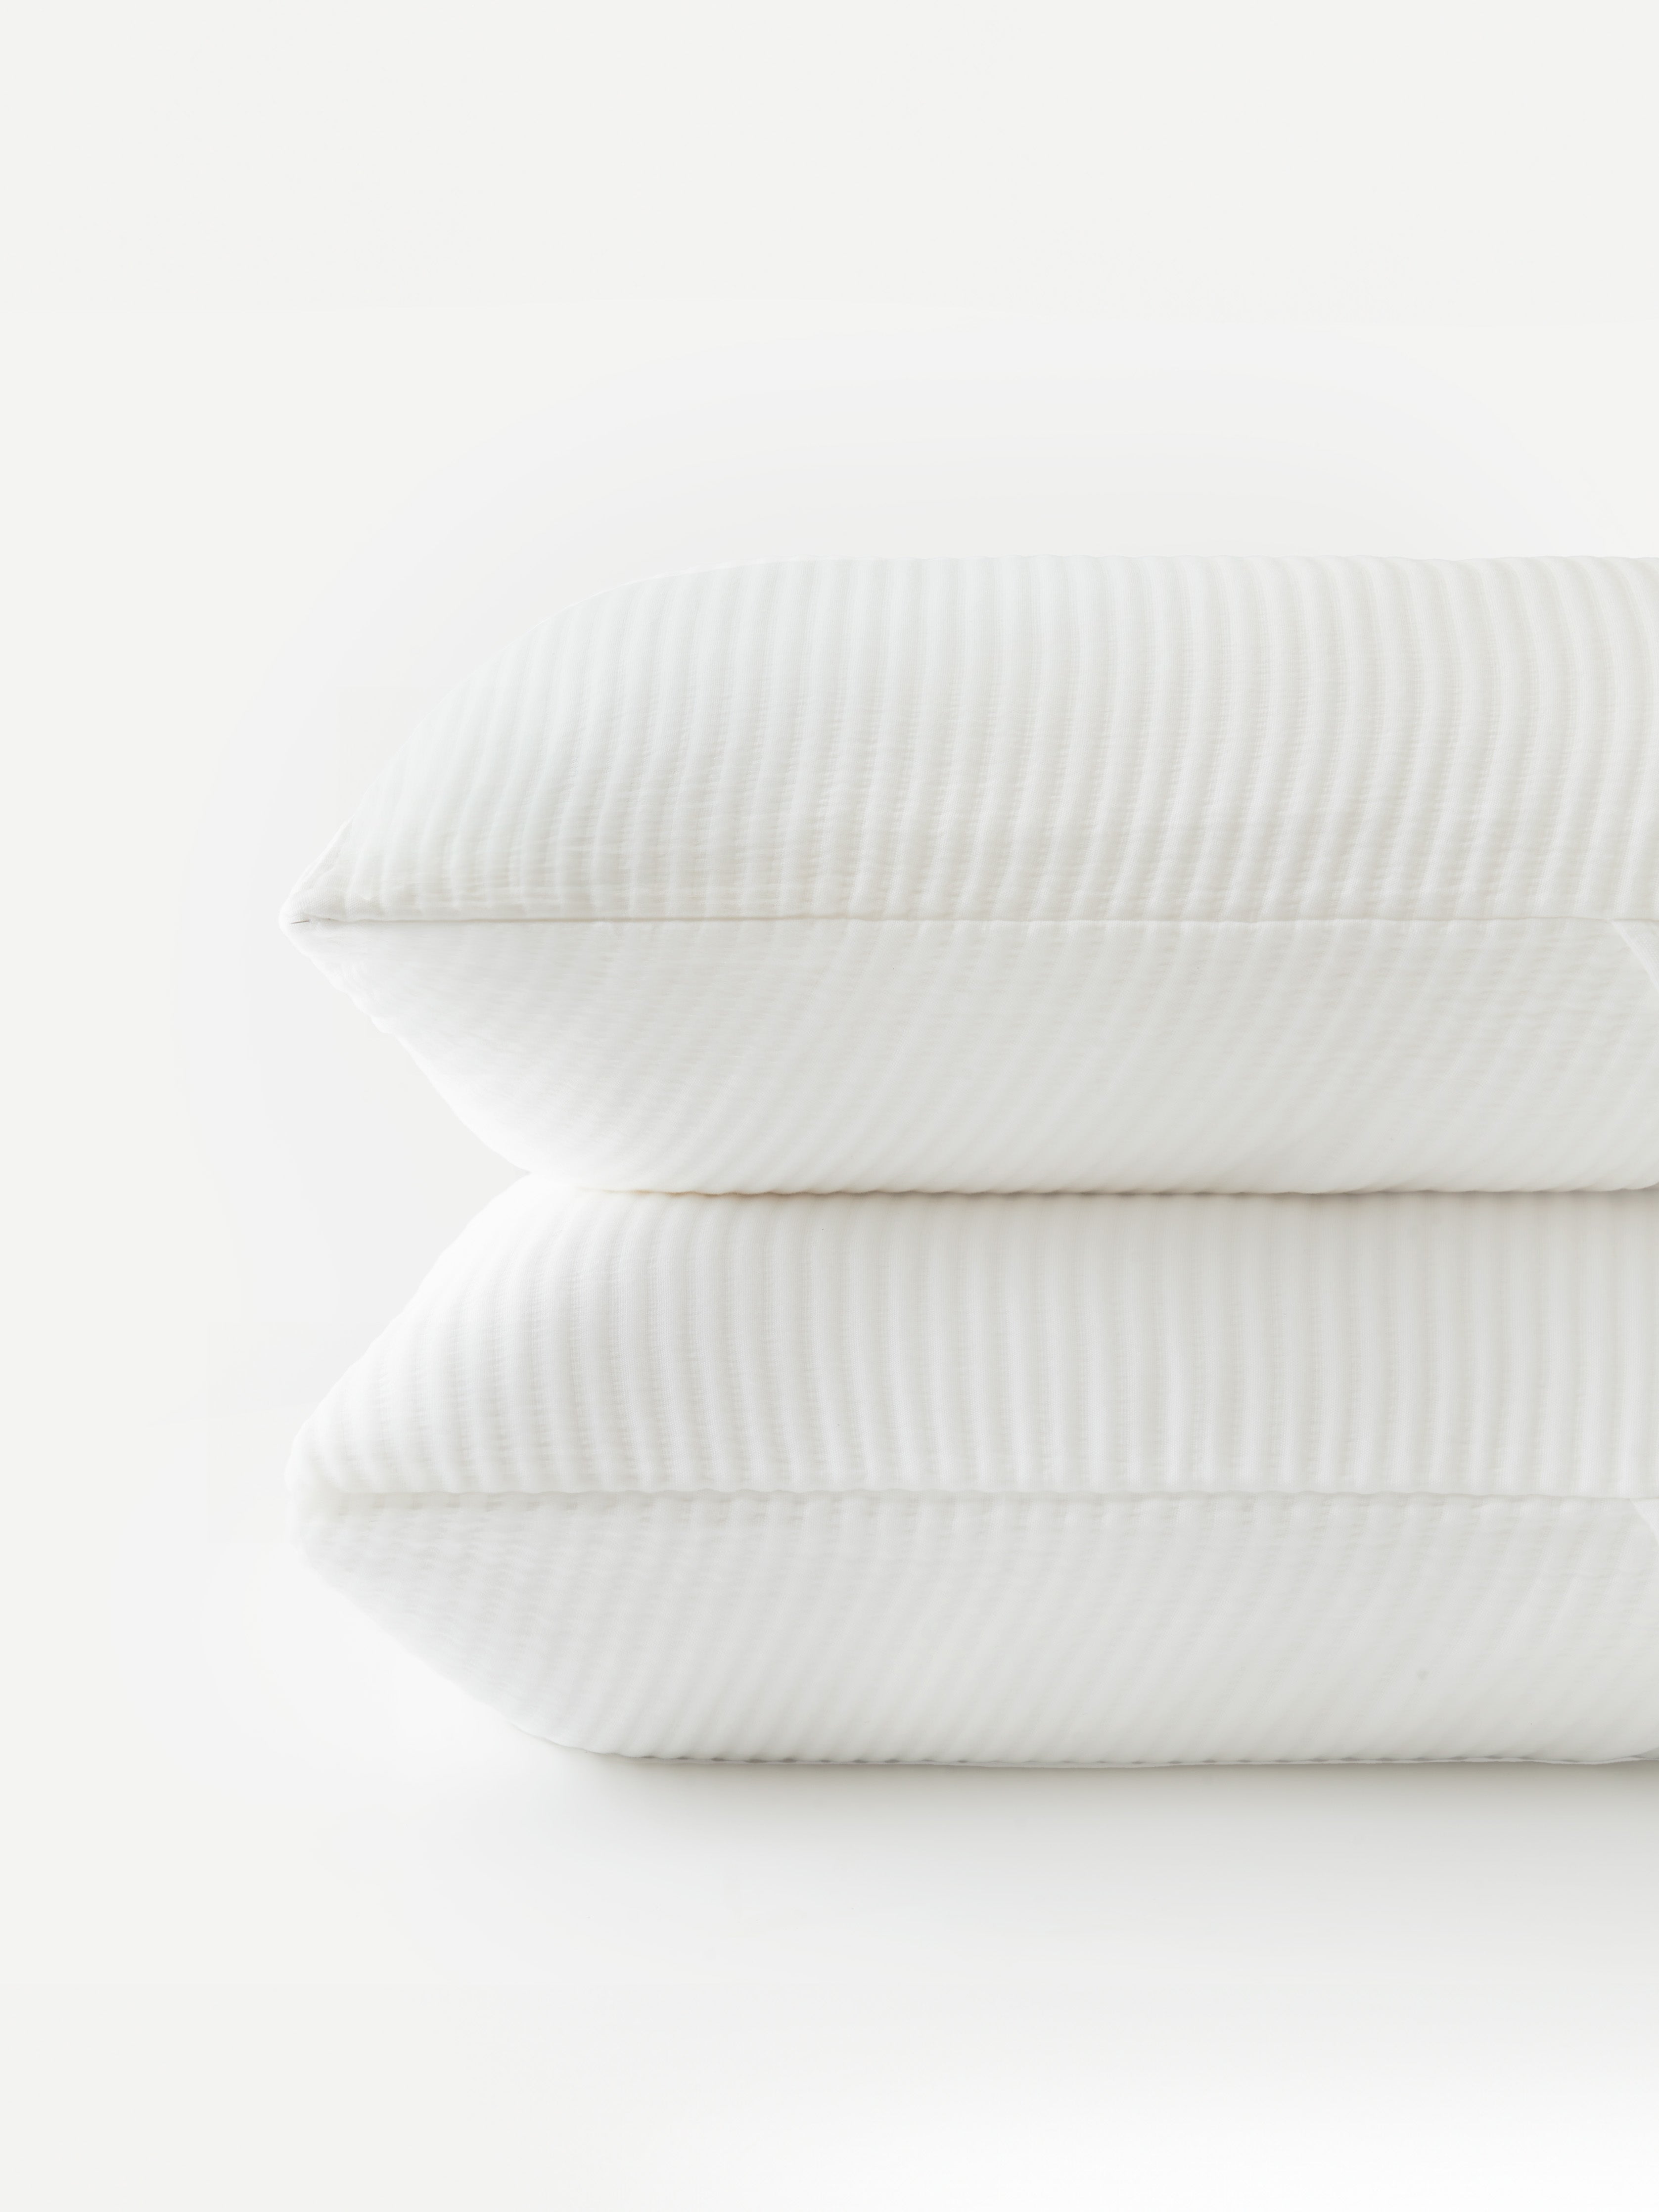 2 white coverlet shams with white background |Color:White